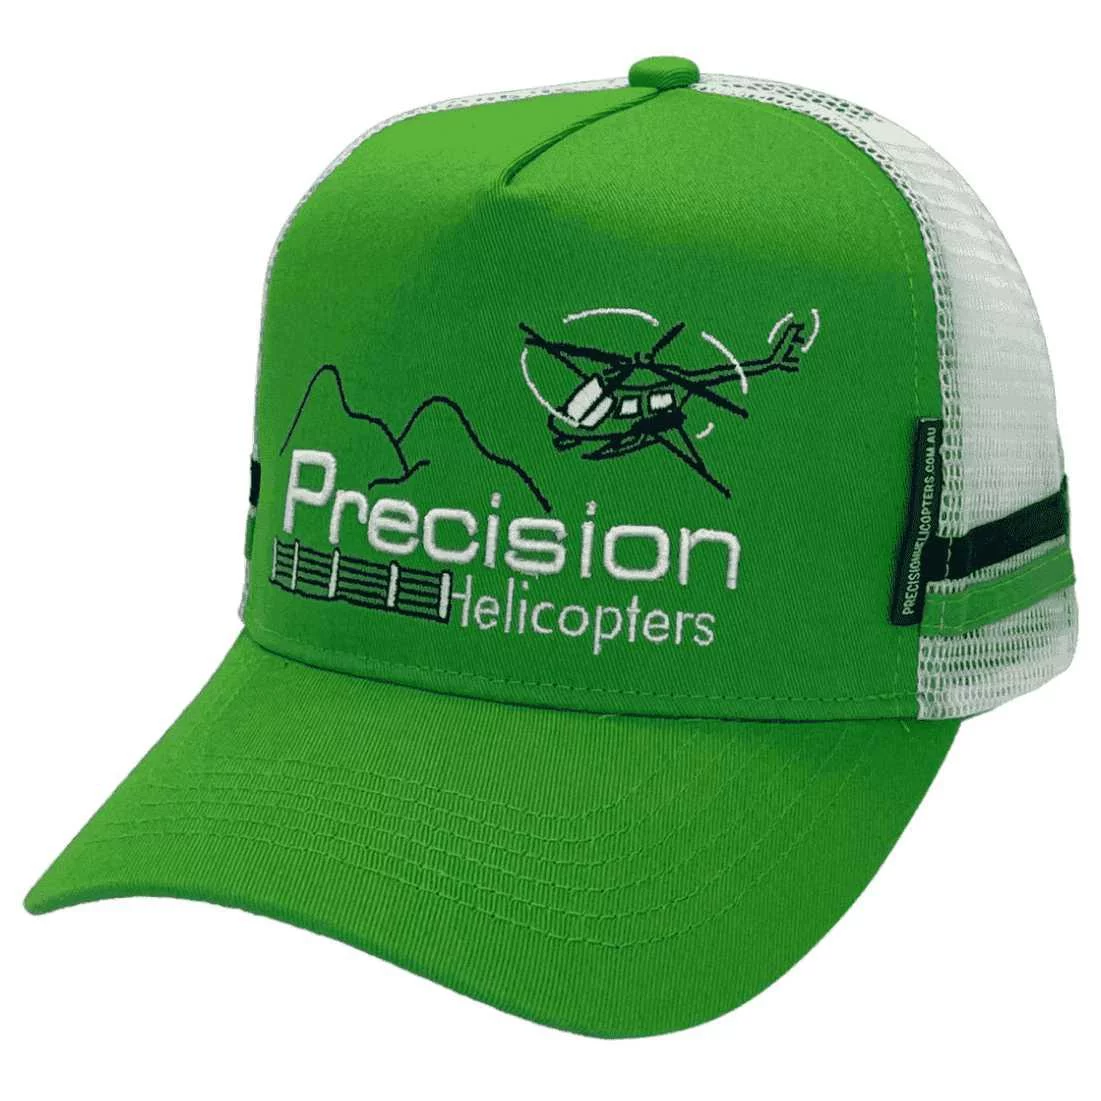 Precision Helicopters Coffs Harbour NSW HP Midrange Aussie Trucker Hat with Australian Head Fit Crown and Double Side Stripes Lime Green, White